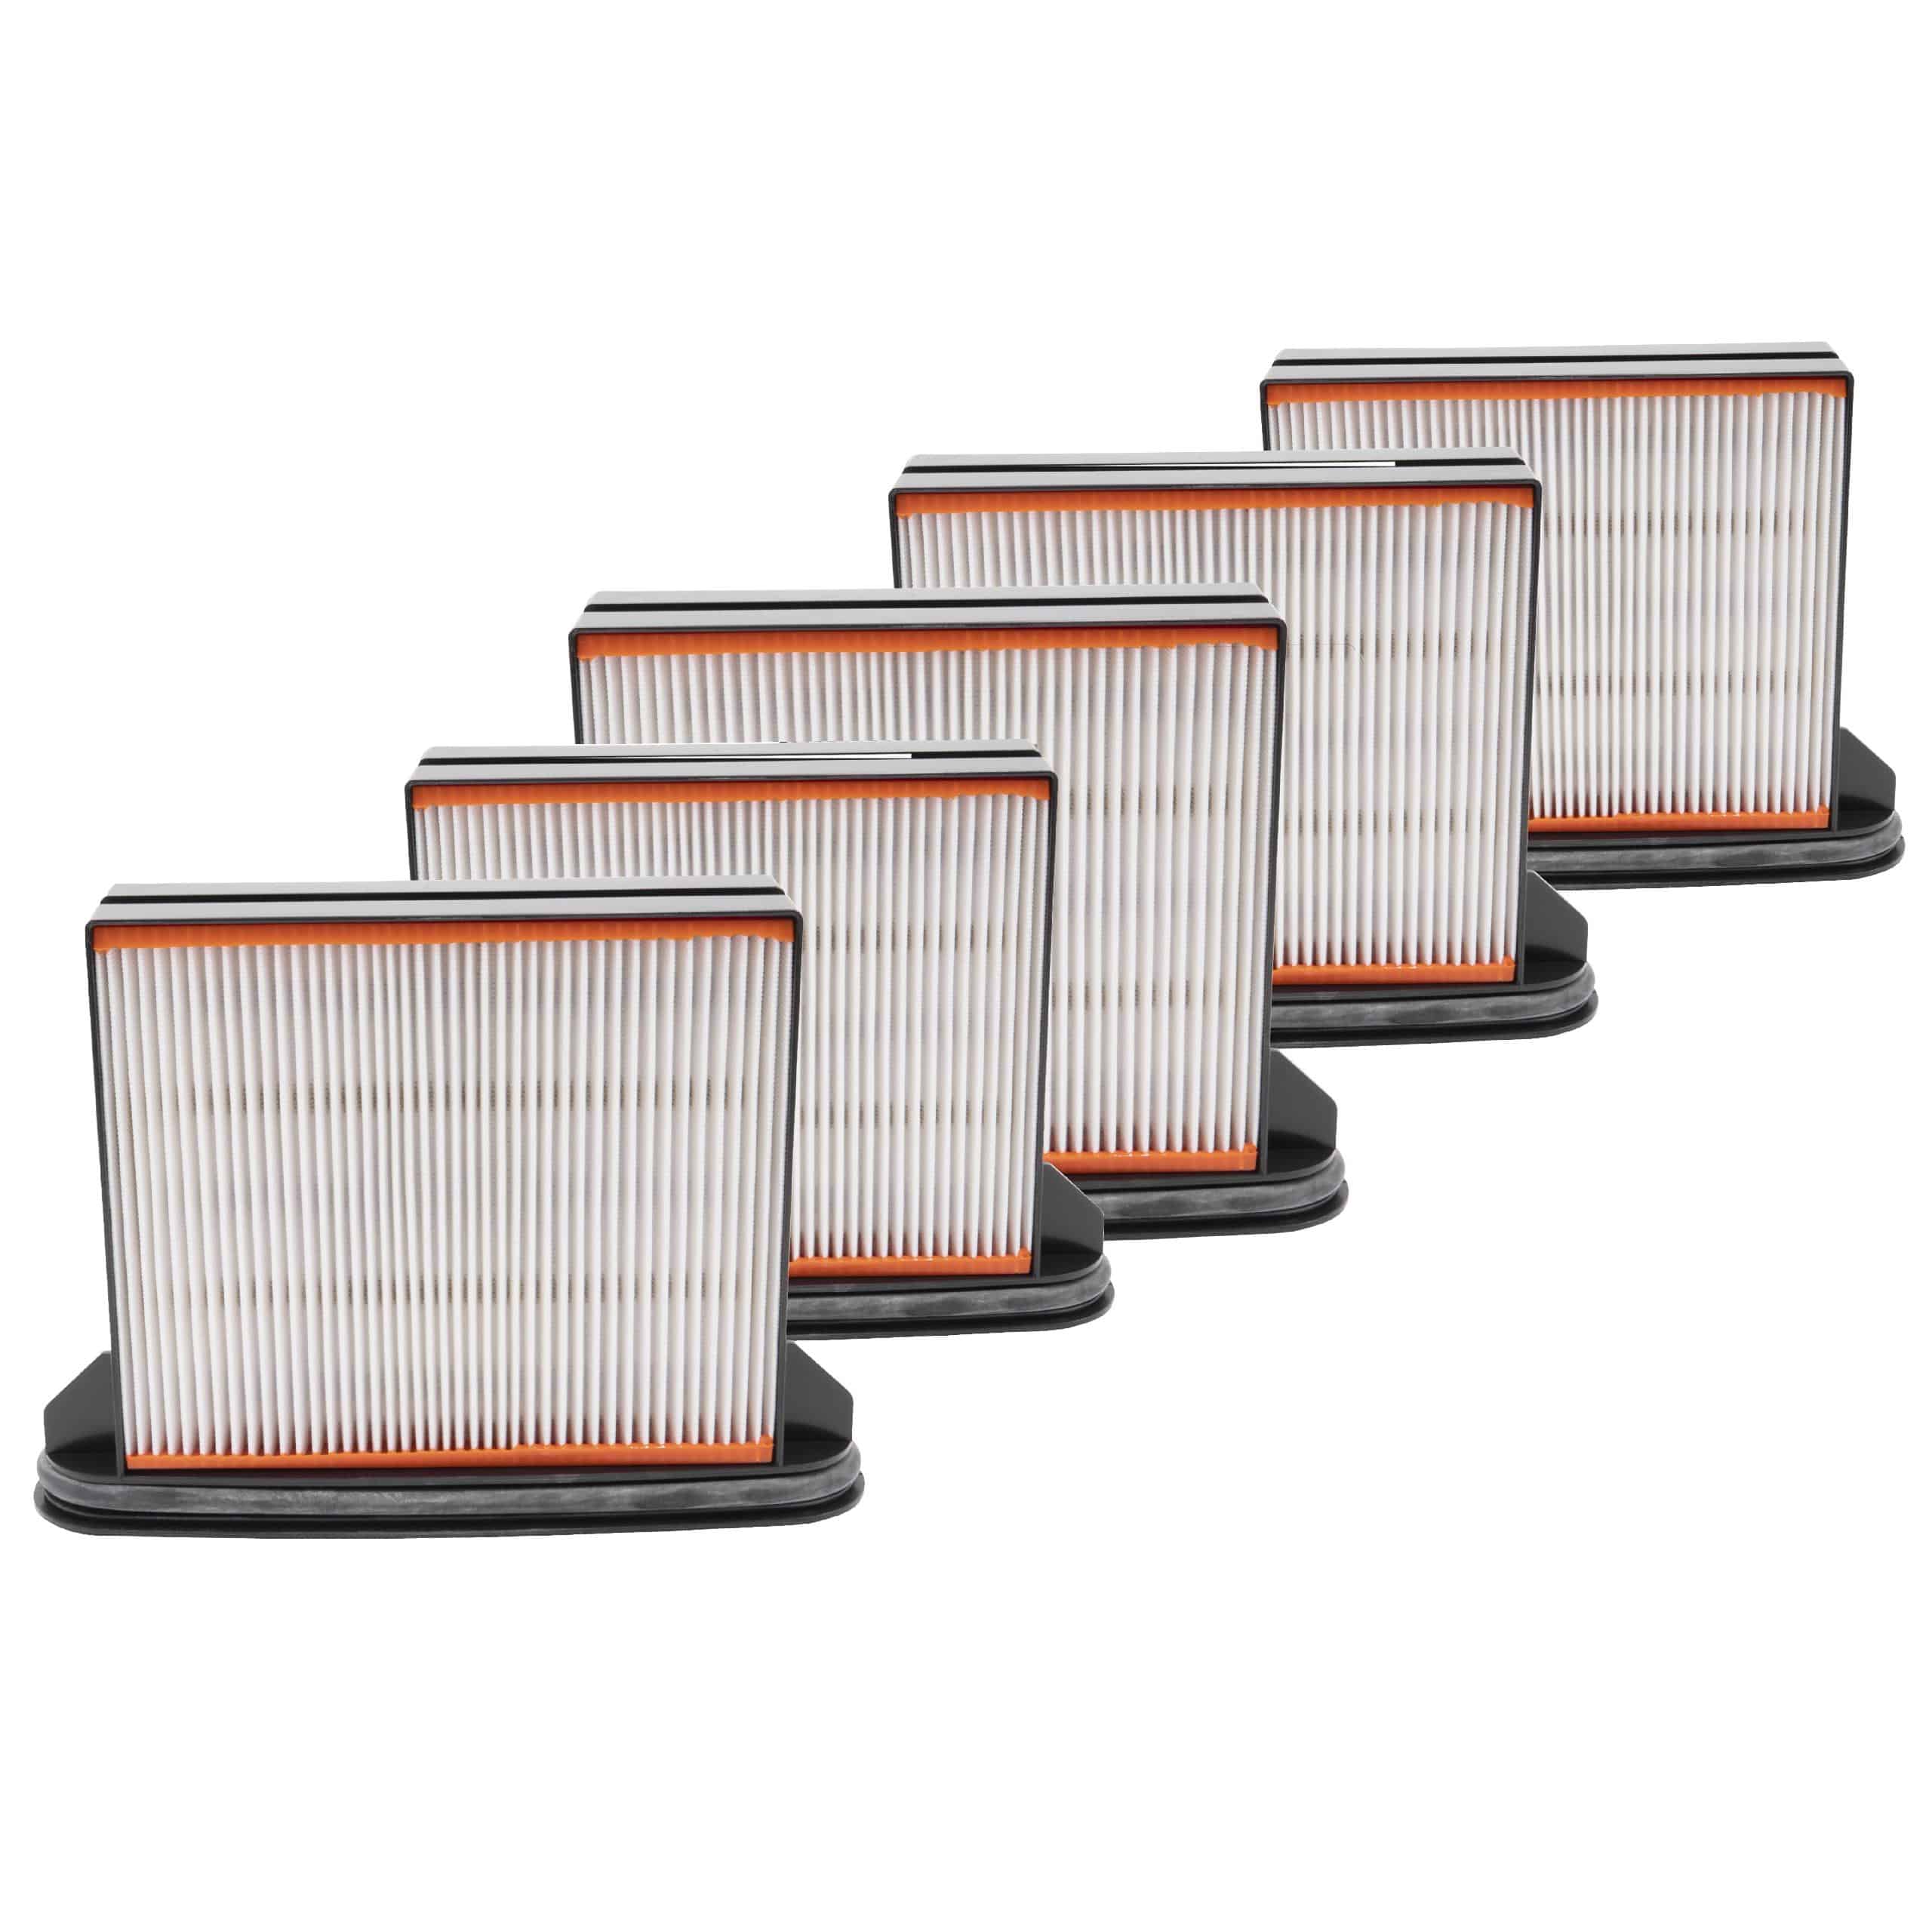 5x flat-fold/wet/HEPA-filter replaces Bosch 2607432015, 35301000 for BTI Vacuum Cleaner